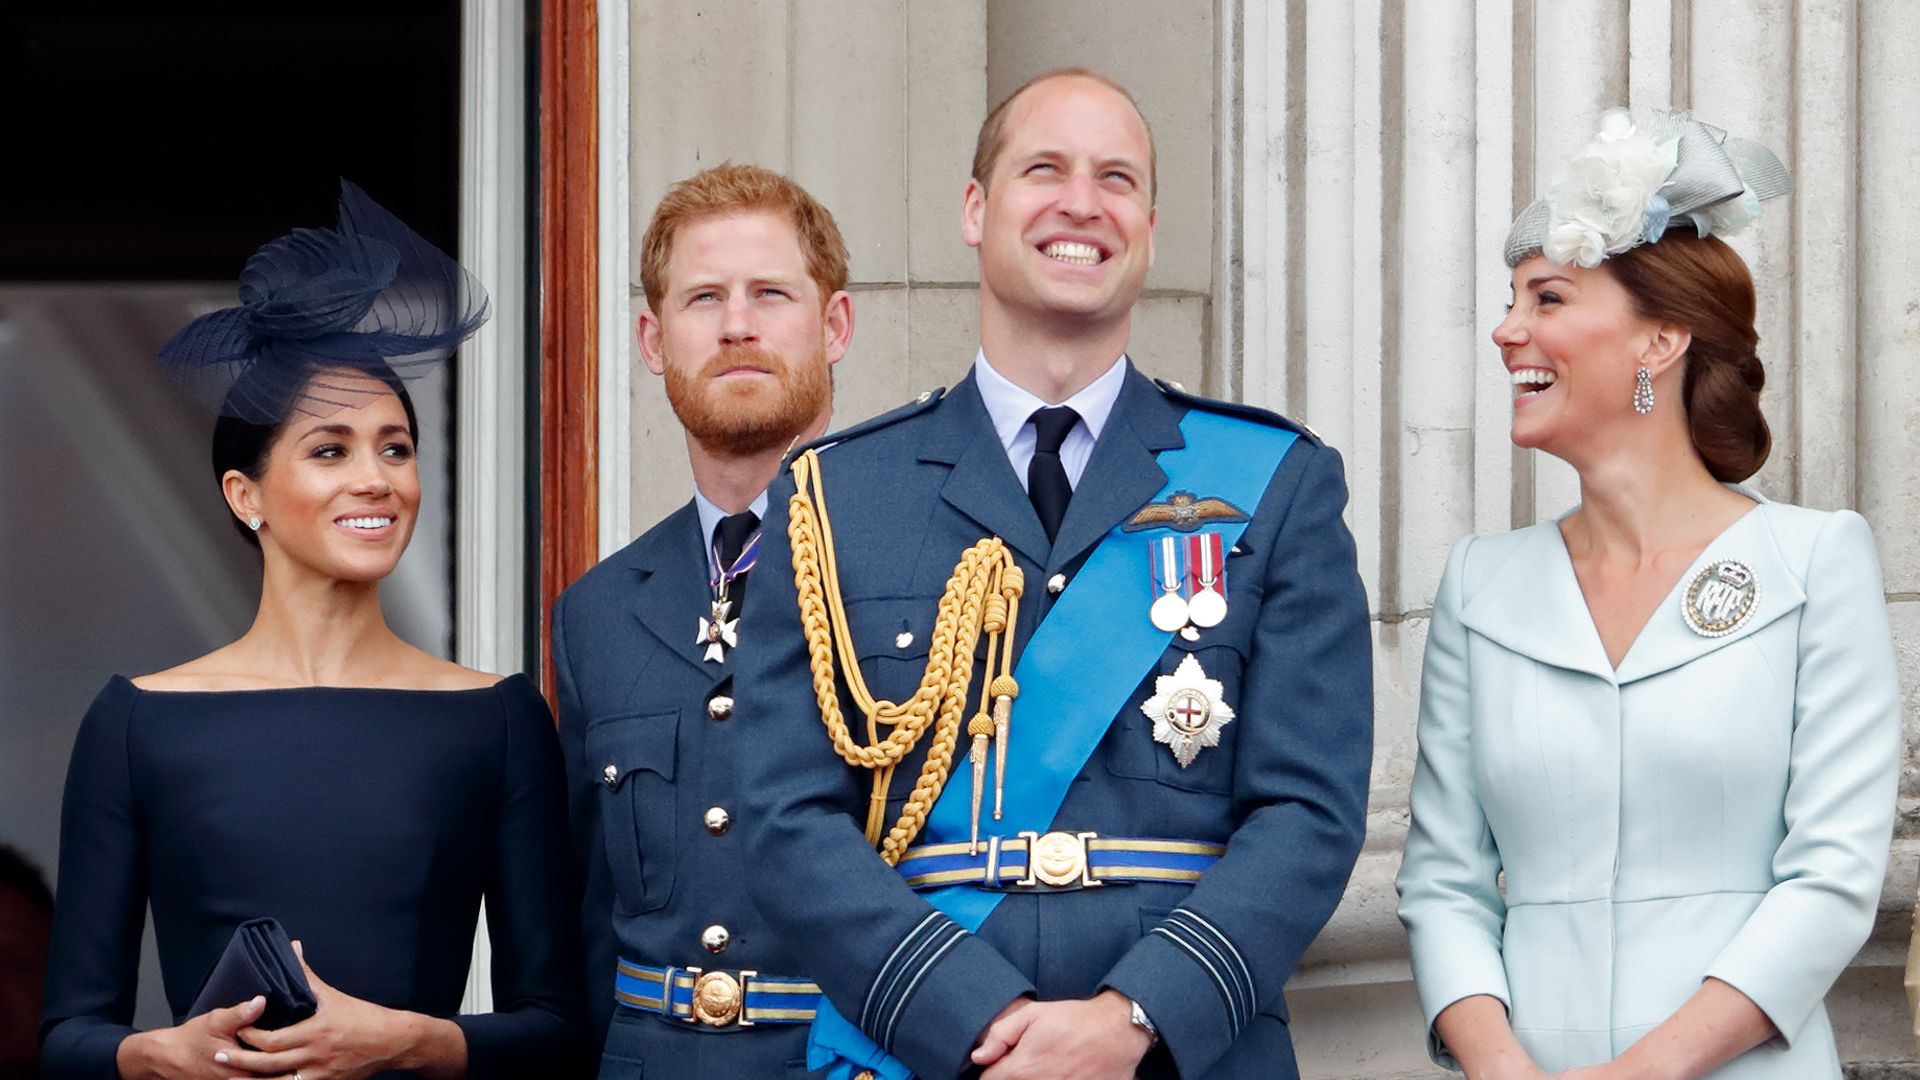 Meghan, Duchess of Sussex, Prince Harry, Duke of Sussex, Prince William, Duke of Cambridge and Catherine, Duchess of Cambridge watch a flypast to mark the centenary of the Royal Air Force from the balcony of Buckingham Palace on July 10, 2018 in London, England.